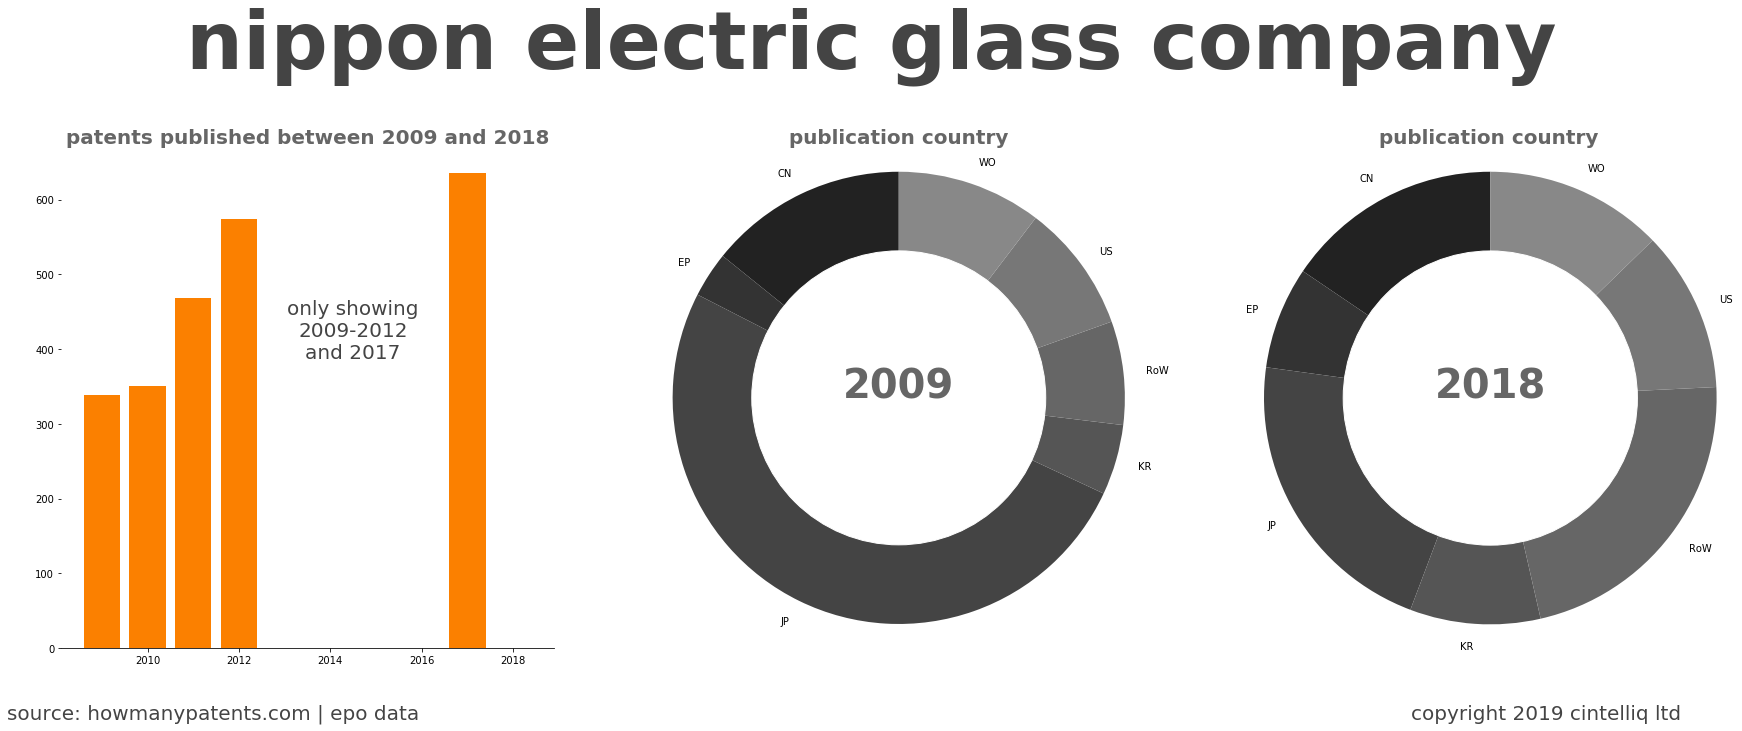 summary of patents for Nippon Electric Glass Company